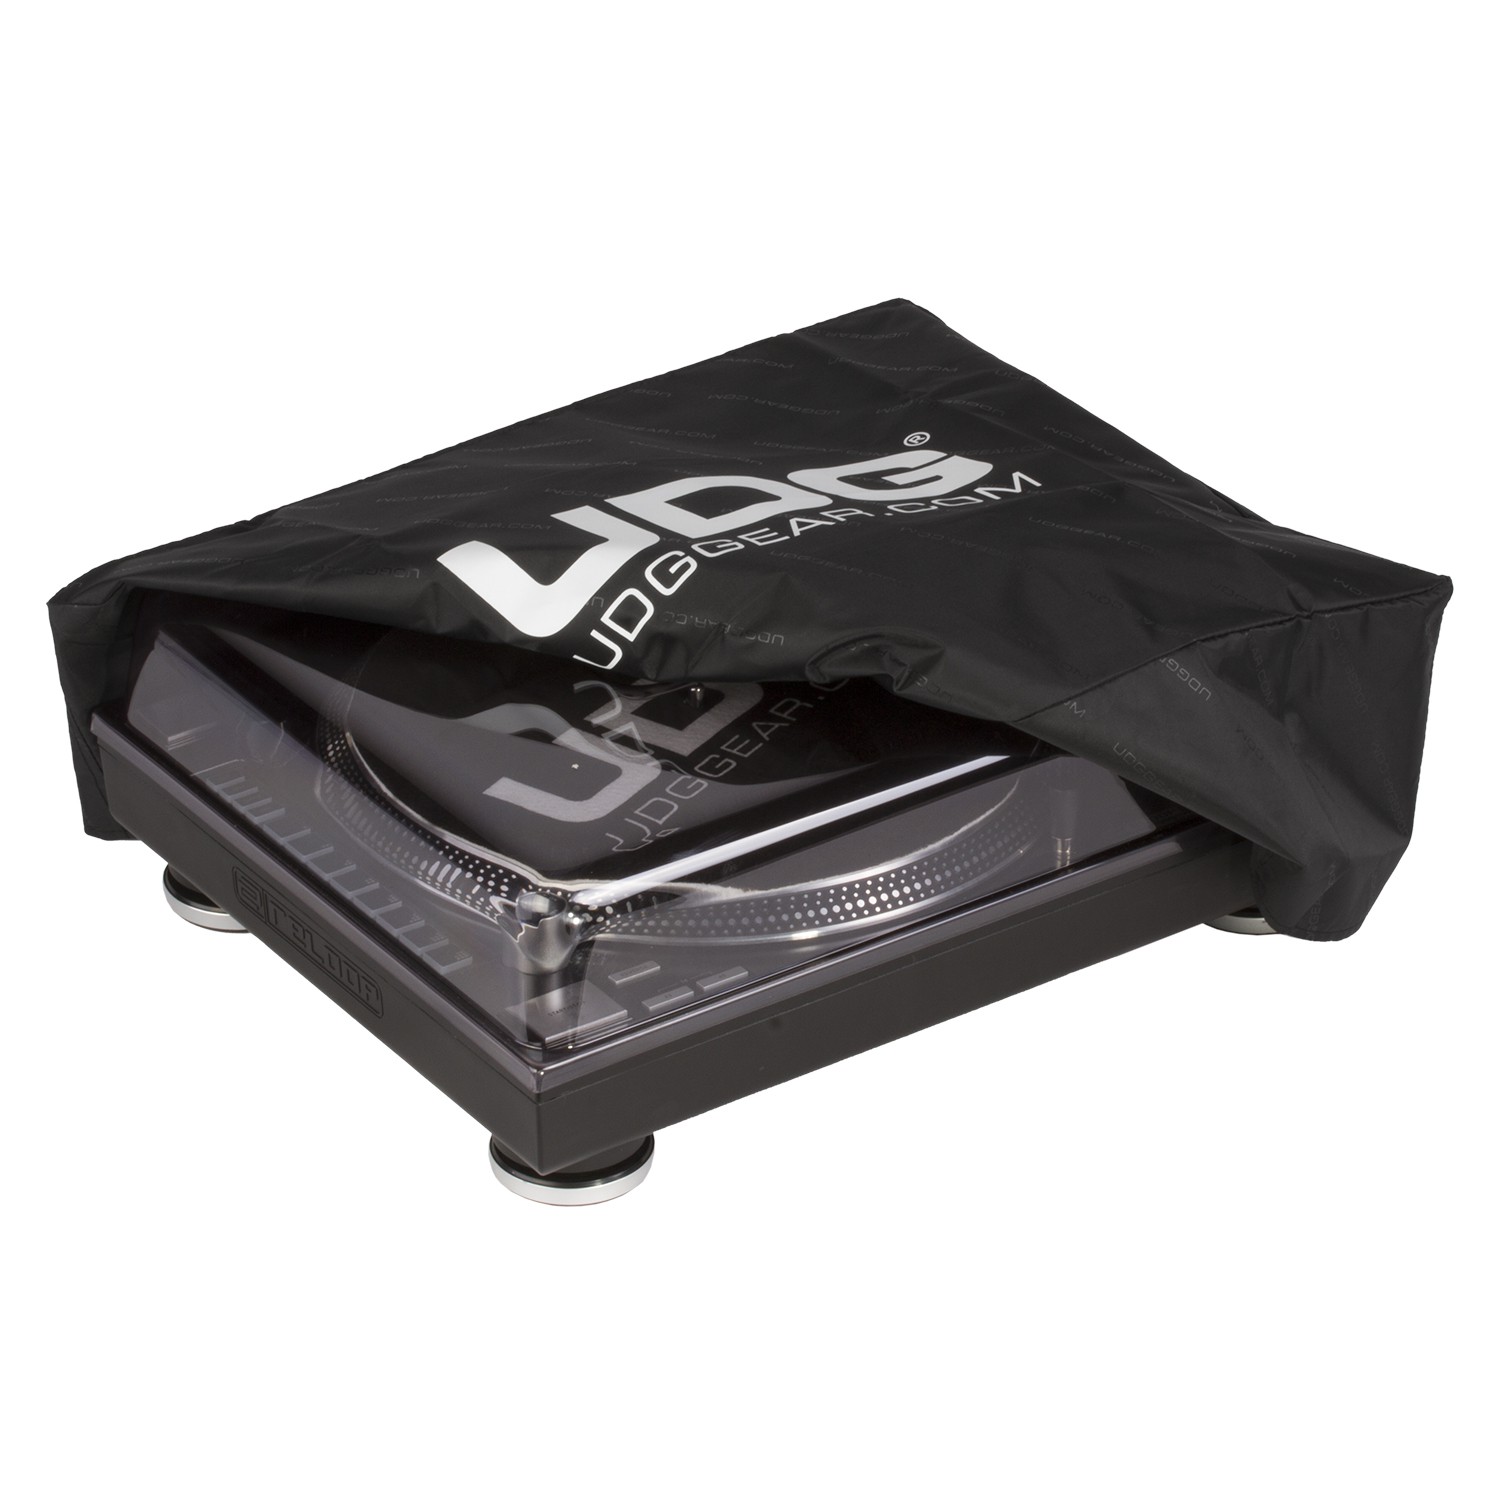 UDG Ultimate Turntable & 19" Mixer Dust Cover Black (1 pc) по цене 1 310.40 ₽